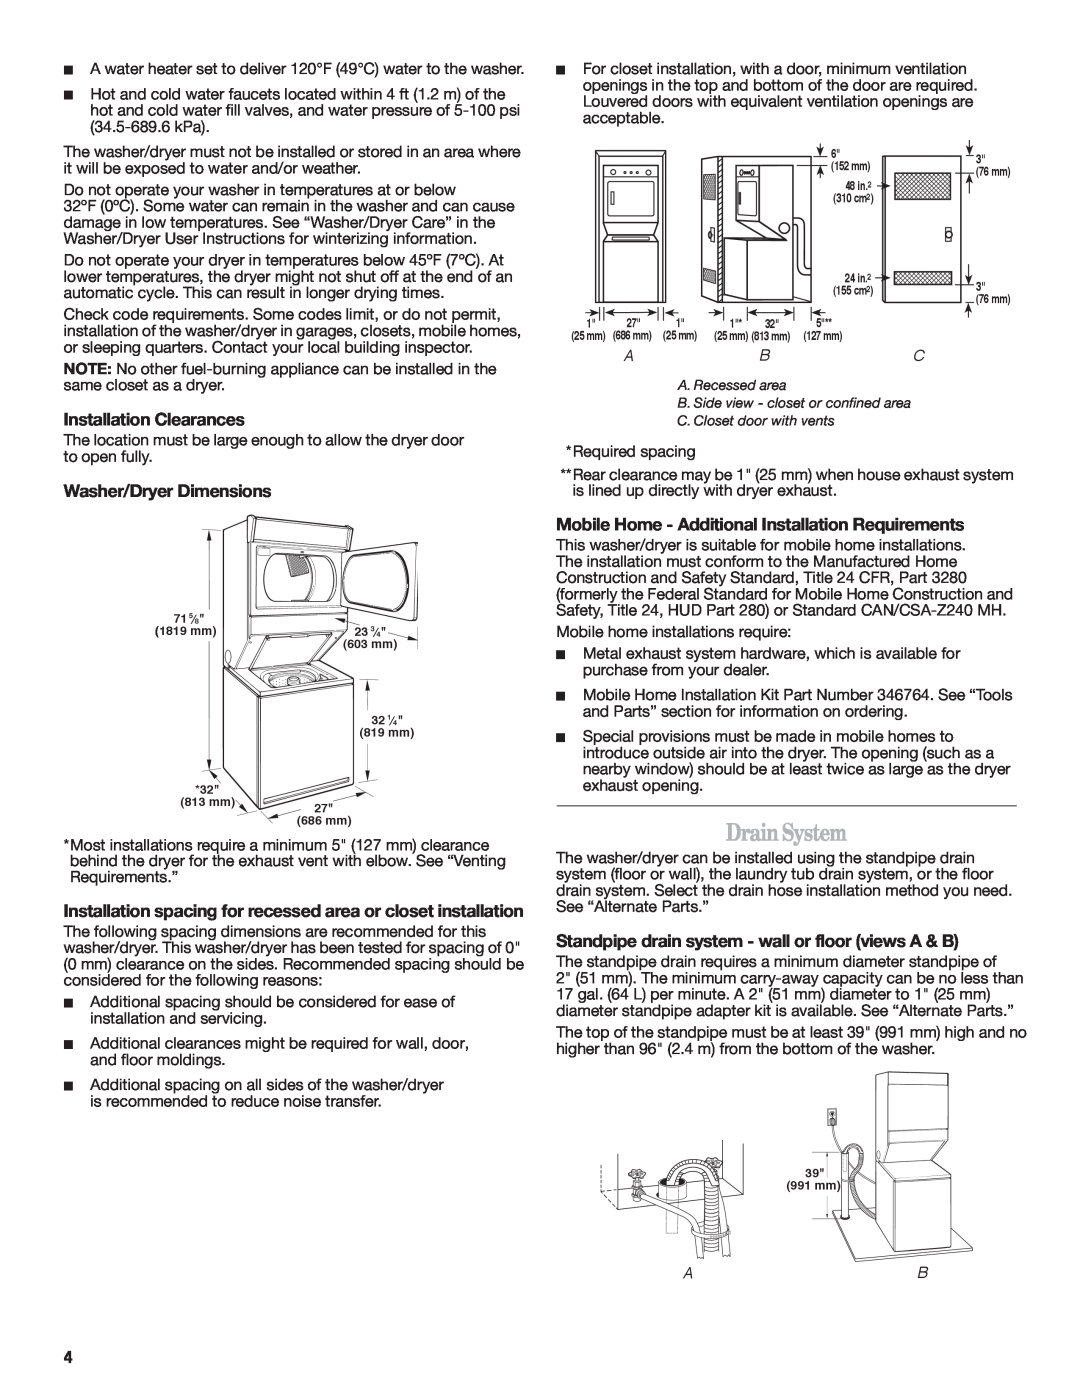 Whirlpool Gas Washer/Dryer installation instructions DrainSystem, Installation Clearances, Washer/Dryer Dimensions 